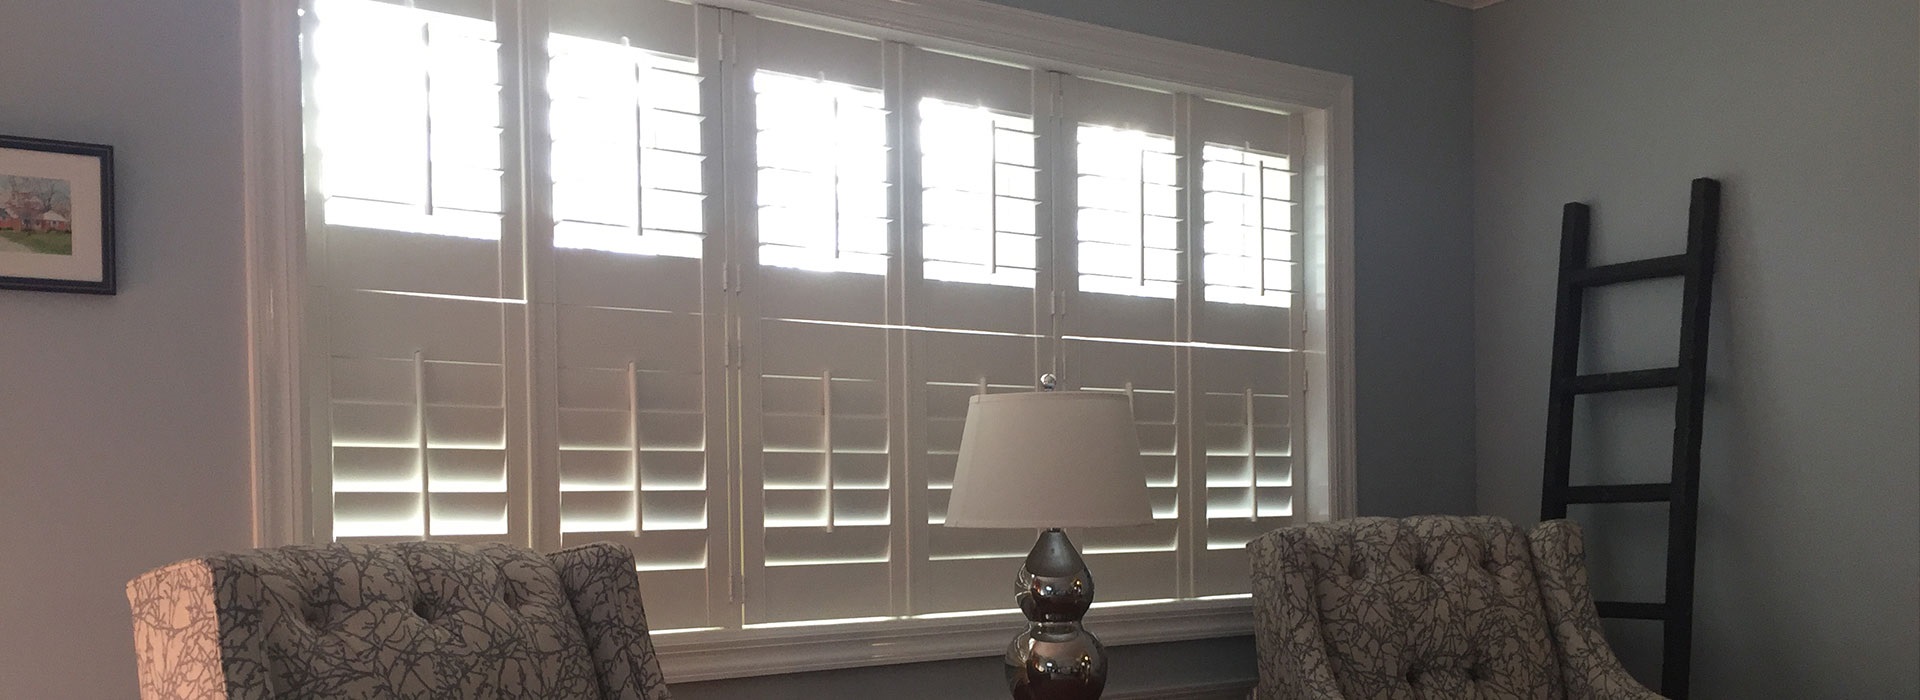 Windows with white blinds